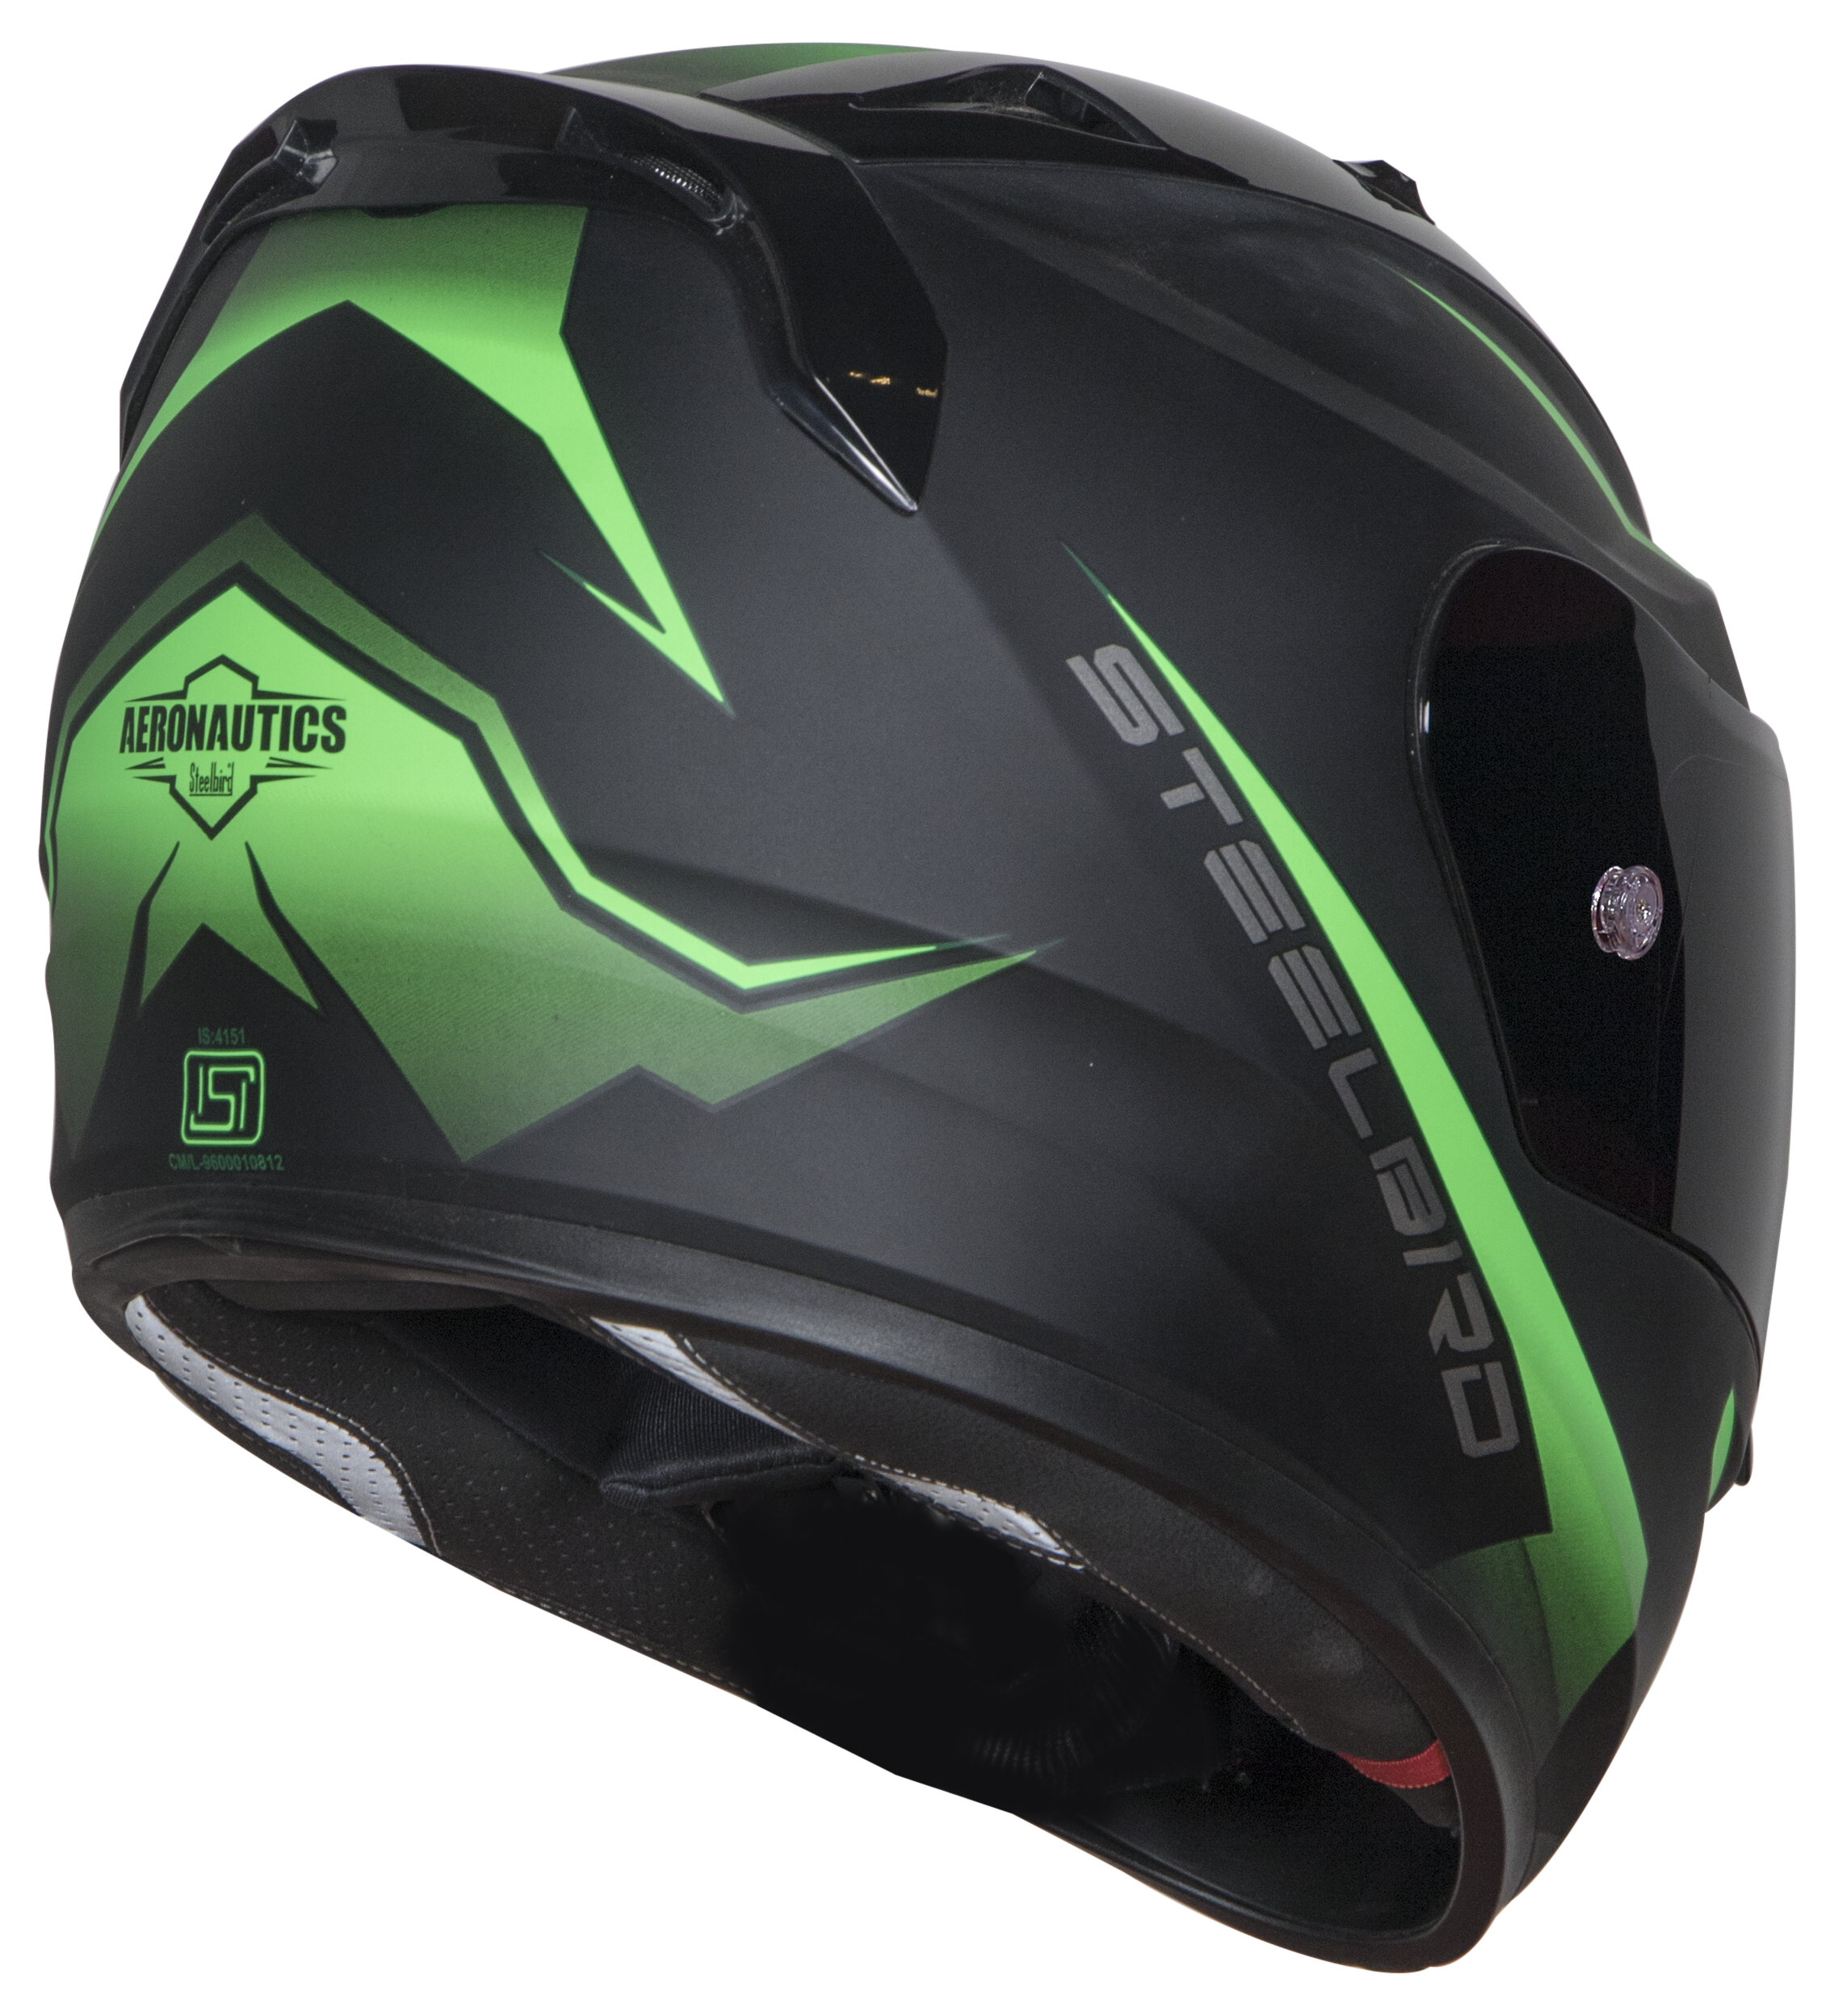 SA-1 WHIF Mat Black/Green (Fitted With Clear Extra Anti-Fog Shield Chrome Blue Visor Free)